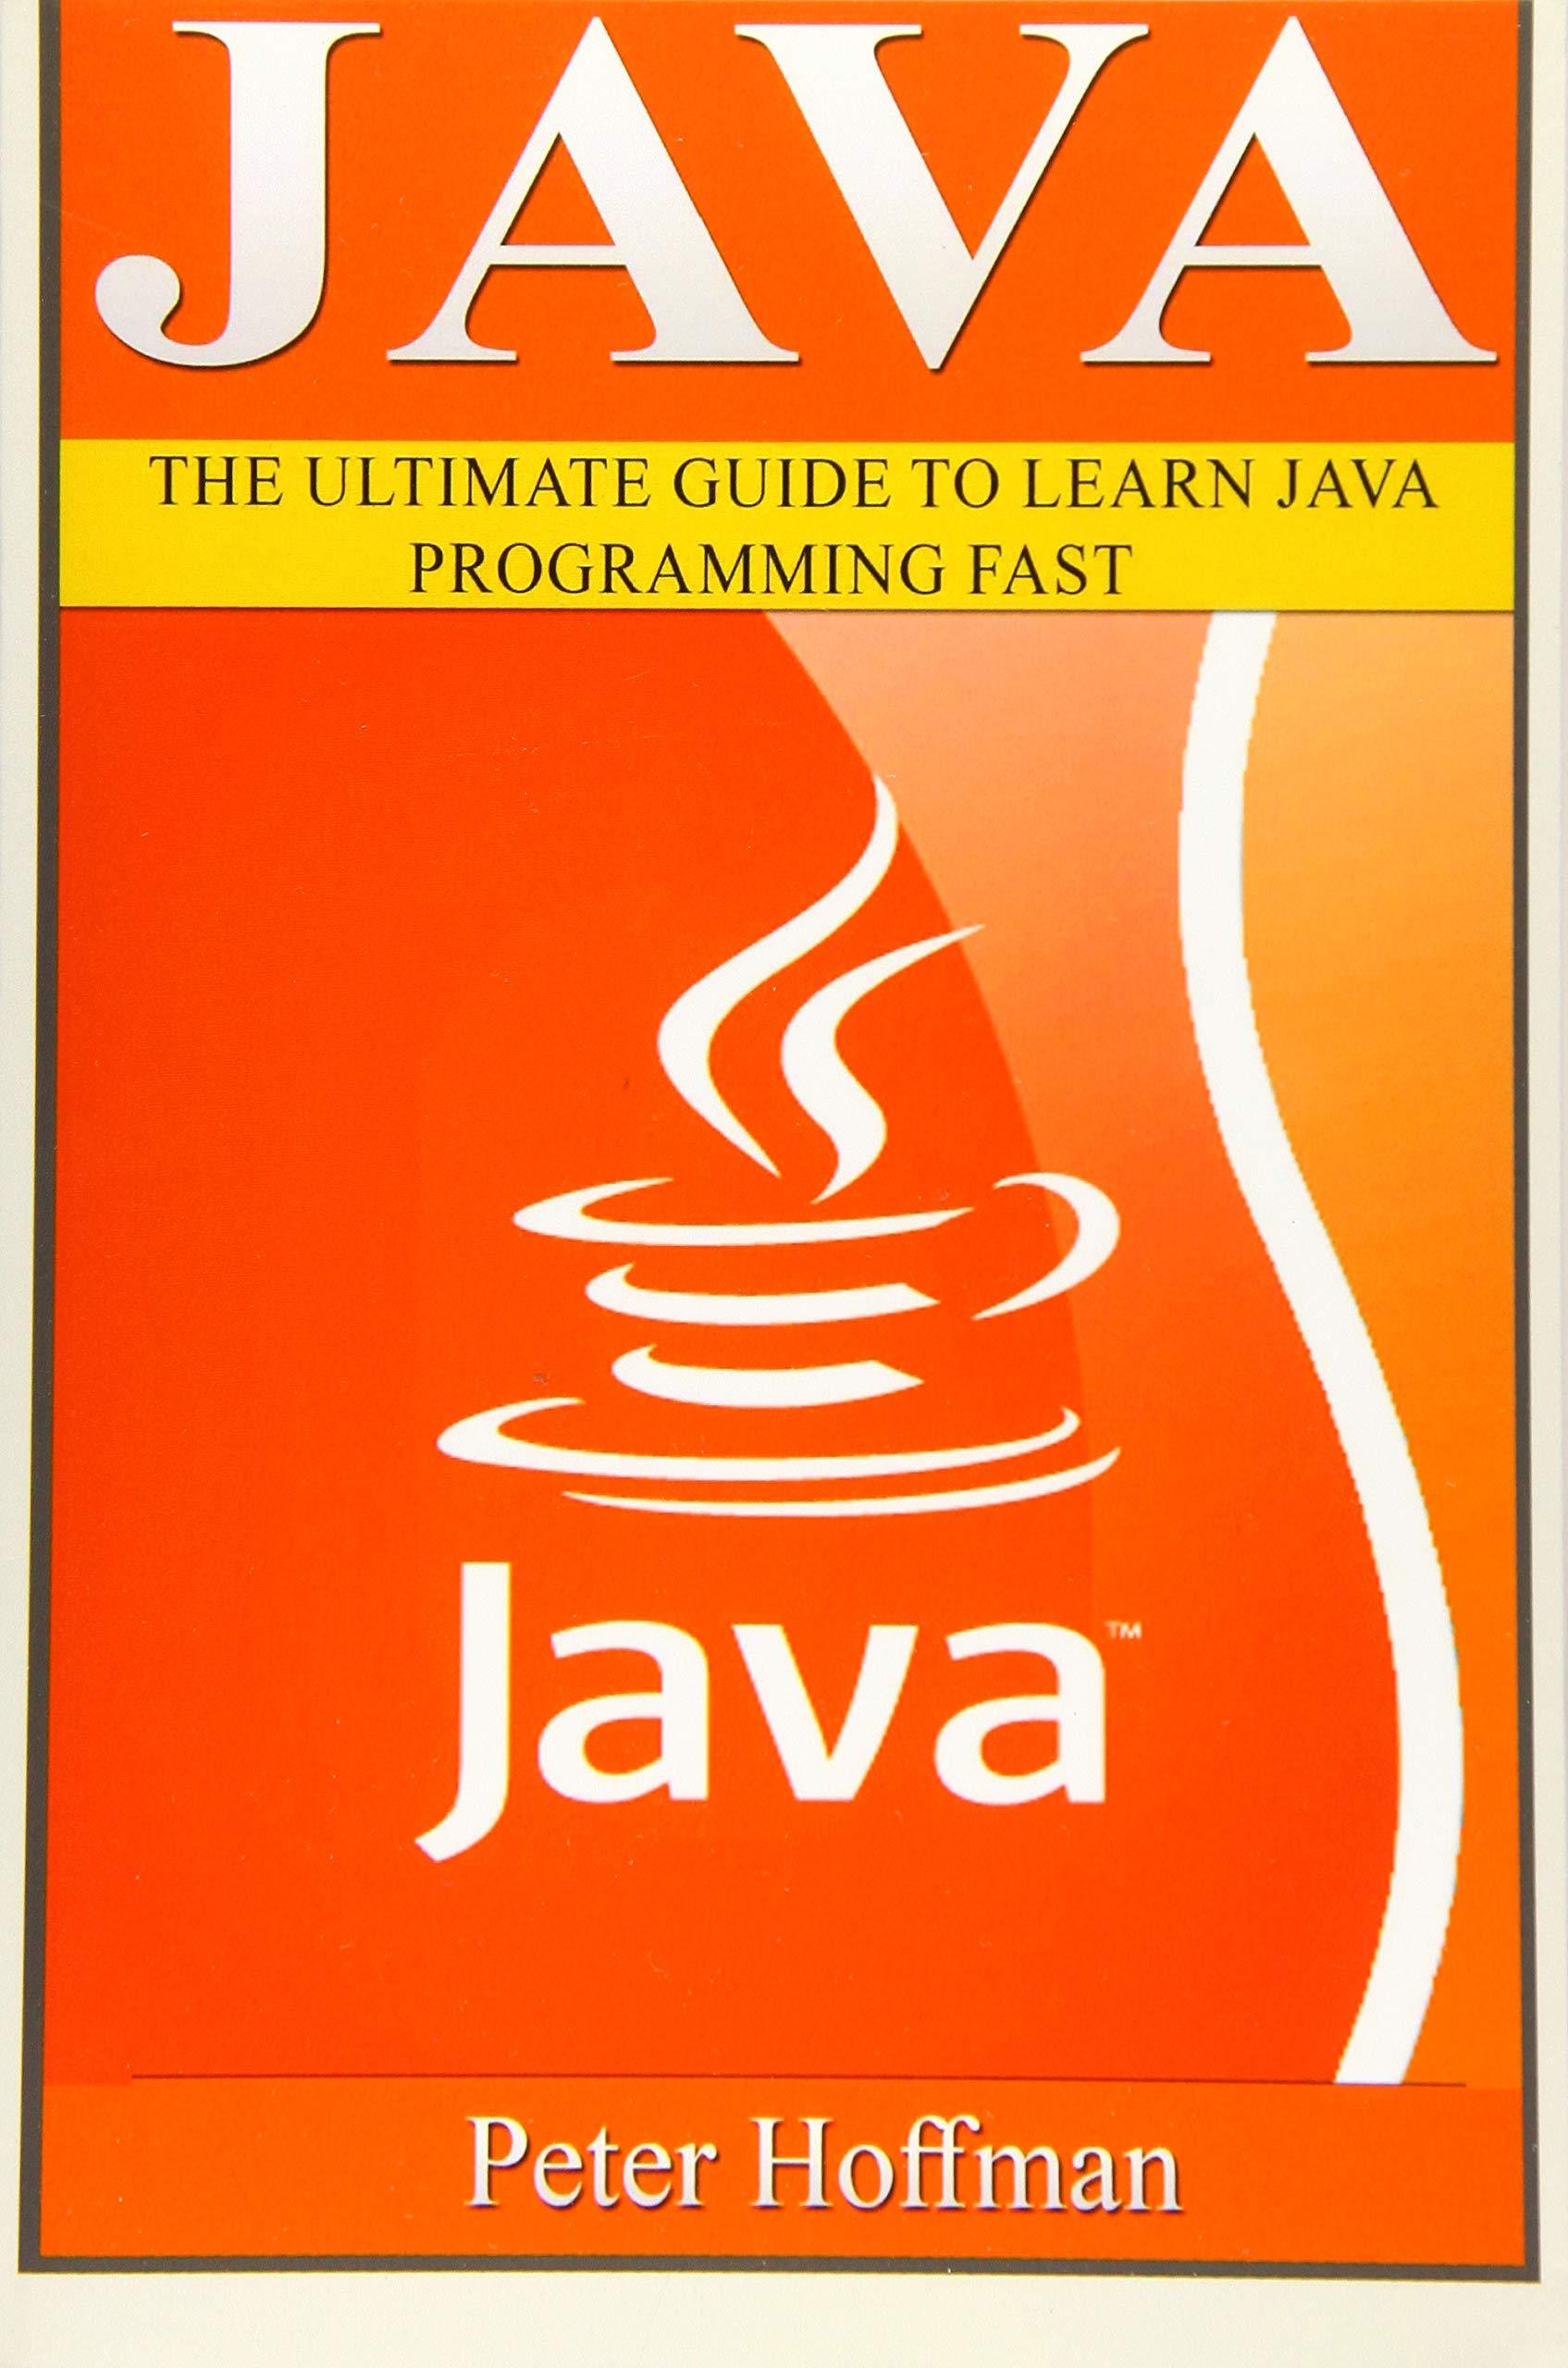 java the ultimate guide to learn java programming fast 1st edition peter hoffman, java programming